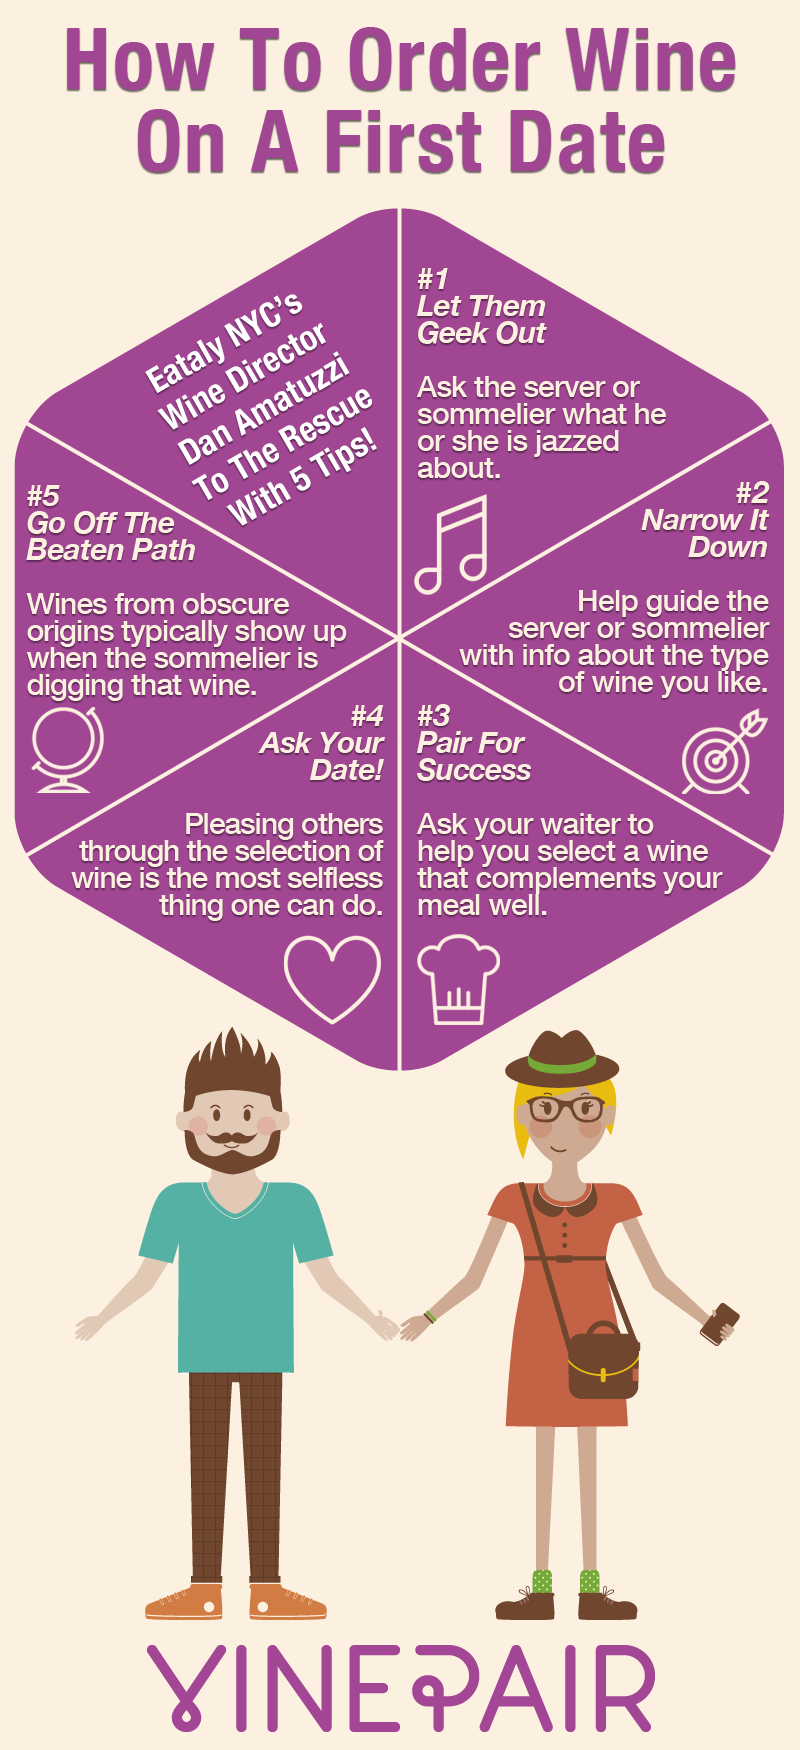 How To Order Wine On A First Date [INFOGRAPHIC]